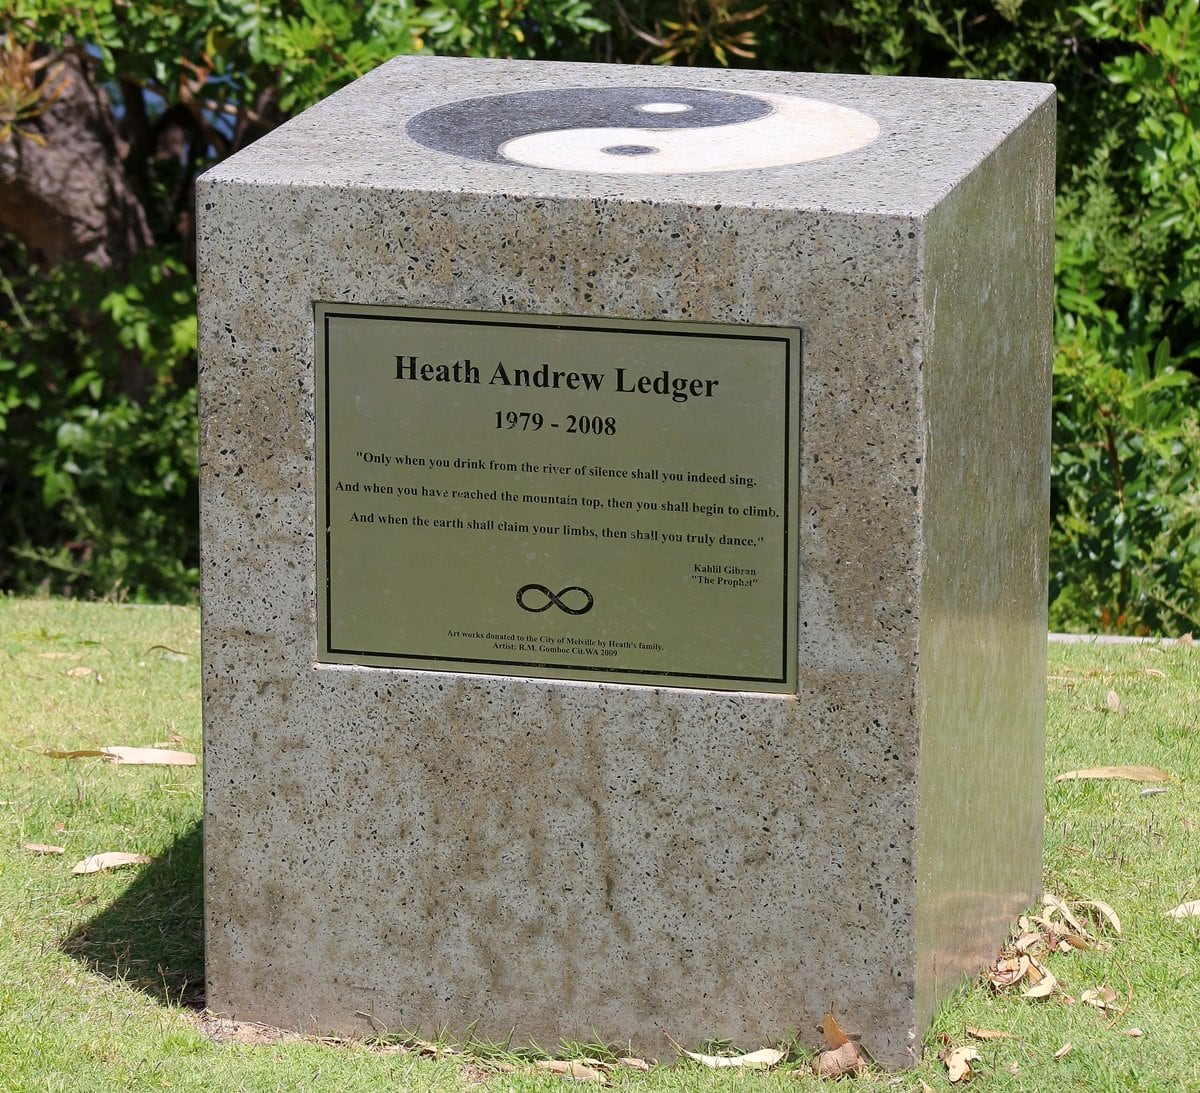 Concrete block dedicated to Perth resident Heath Ledger in a park located on Perth's Swan River